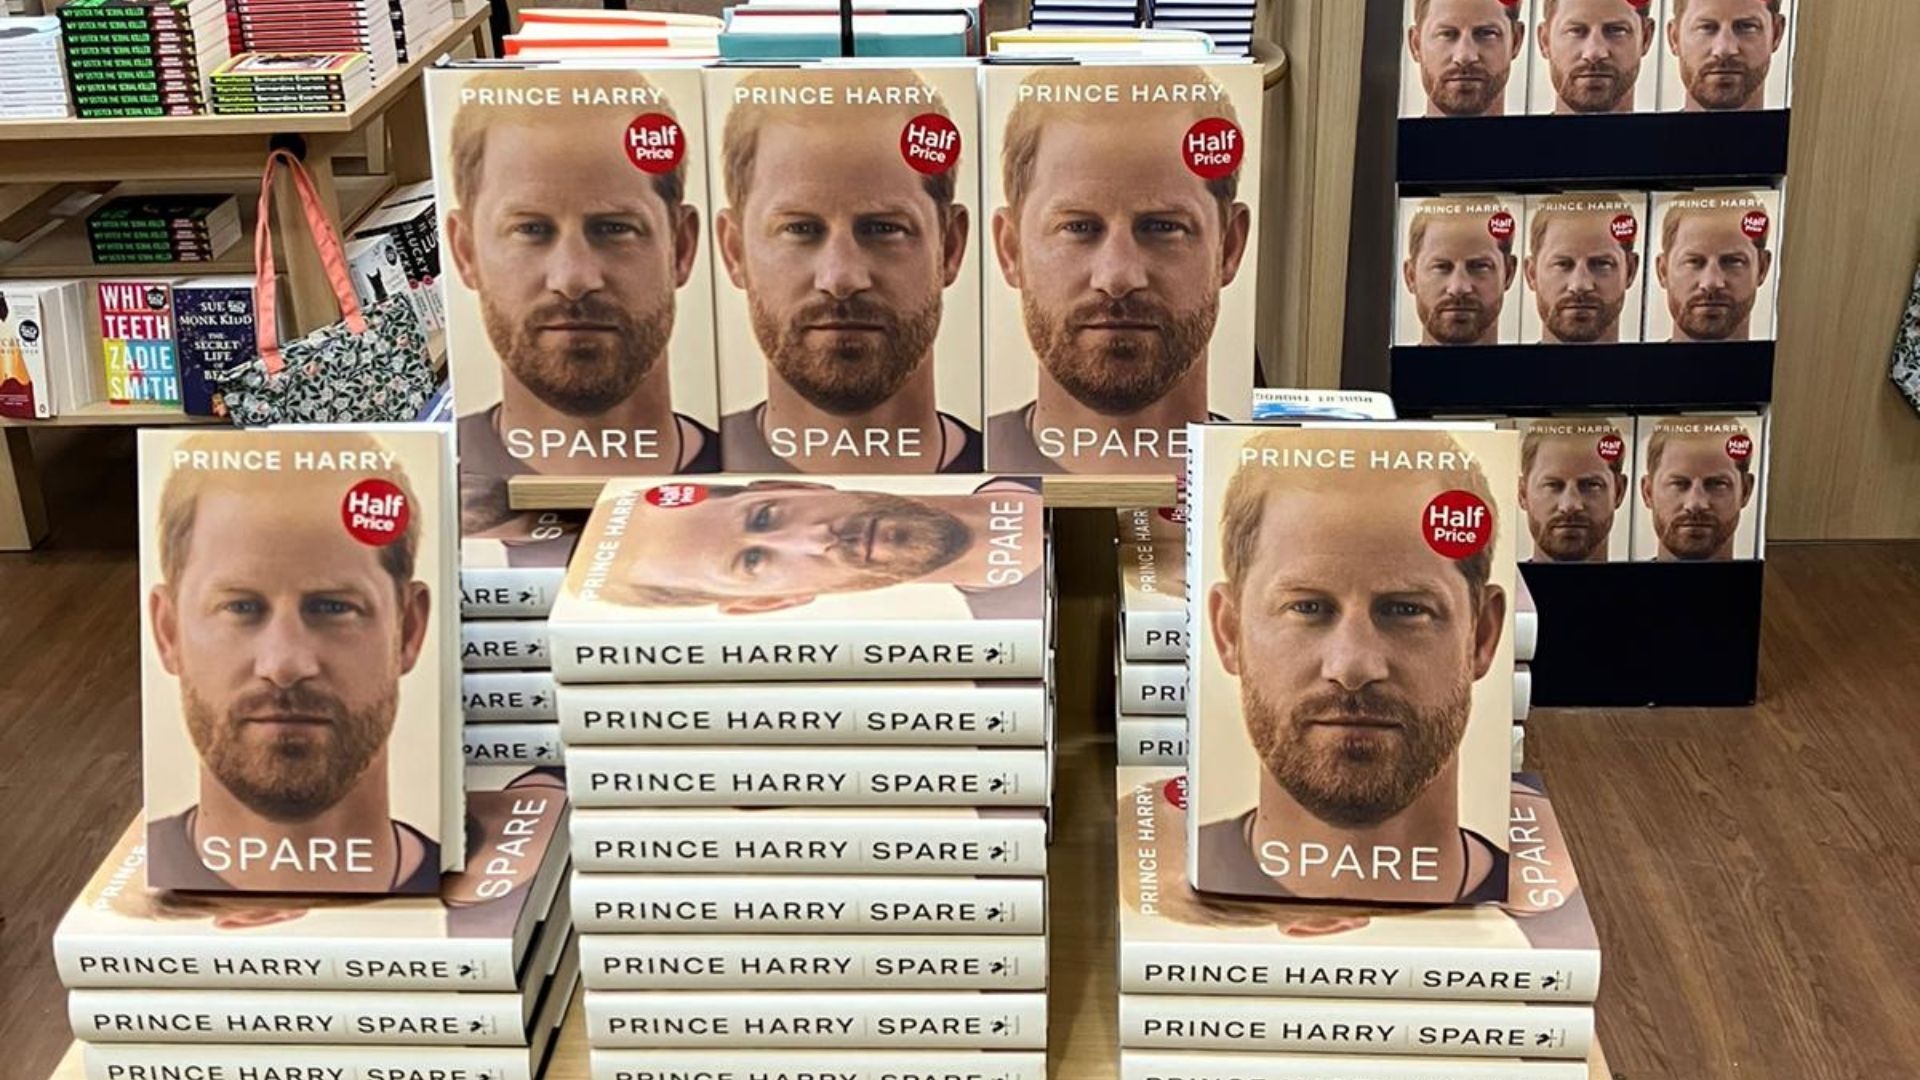 W H Smith shared photos of tables and displays stacked with copies of Prince Harry's memoir